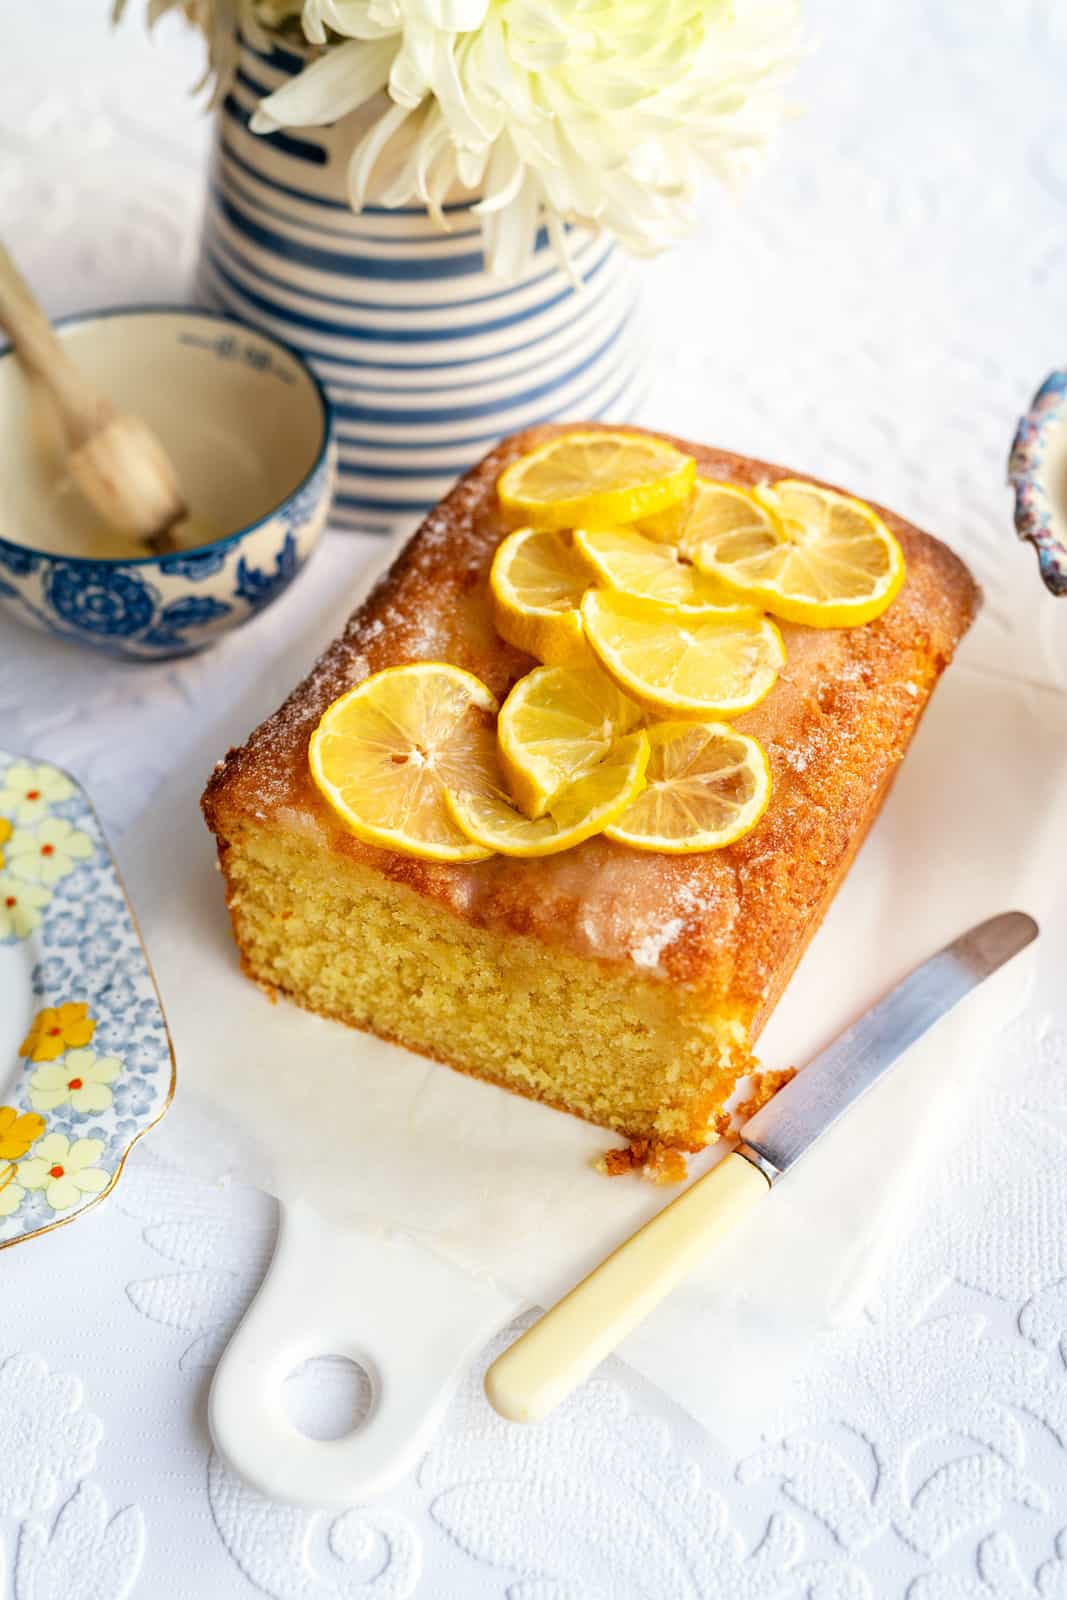 Lemon Drizzle Loaf cake decorated with lemon slices on a white ceramic board